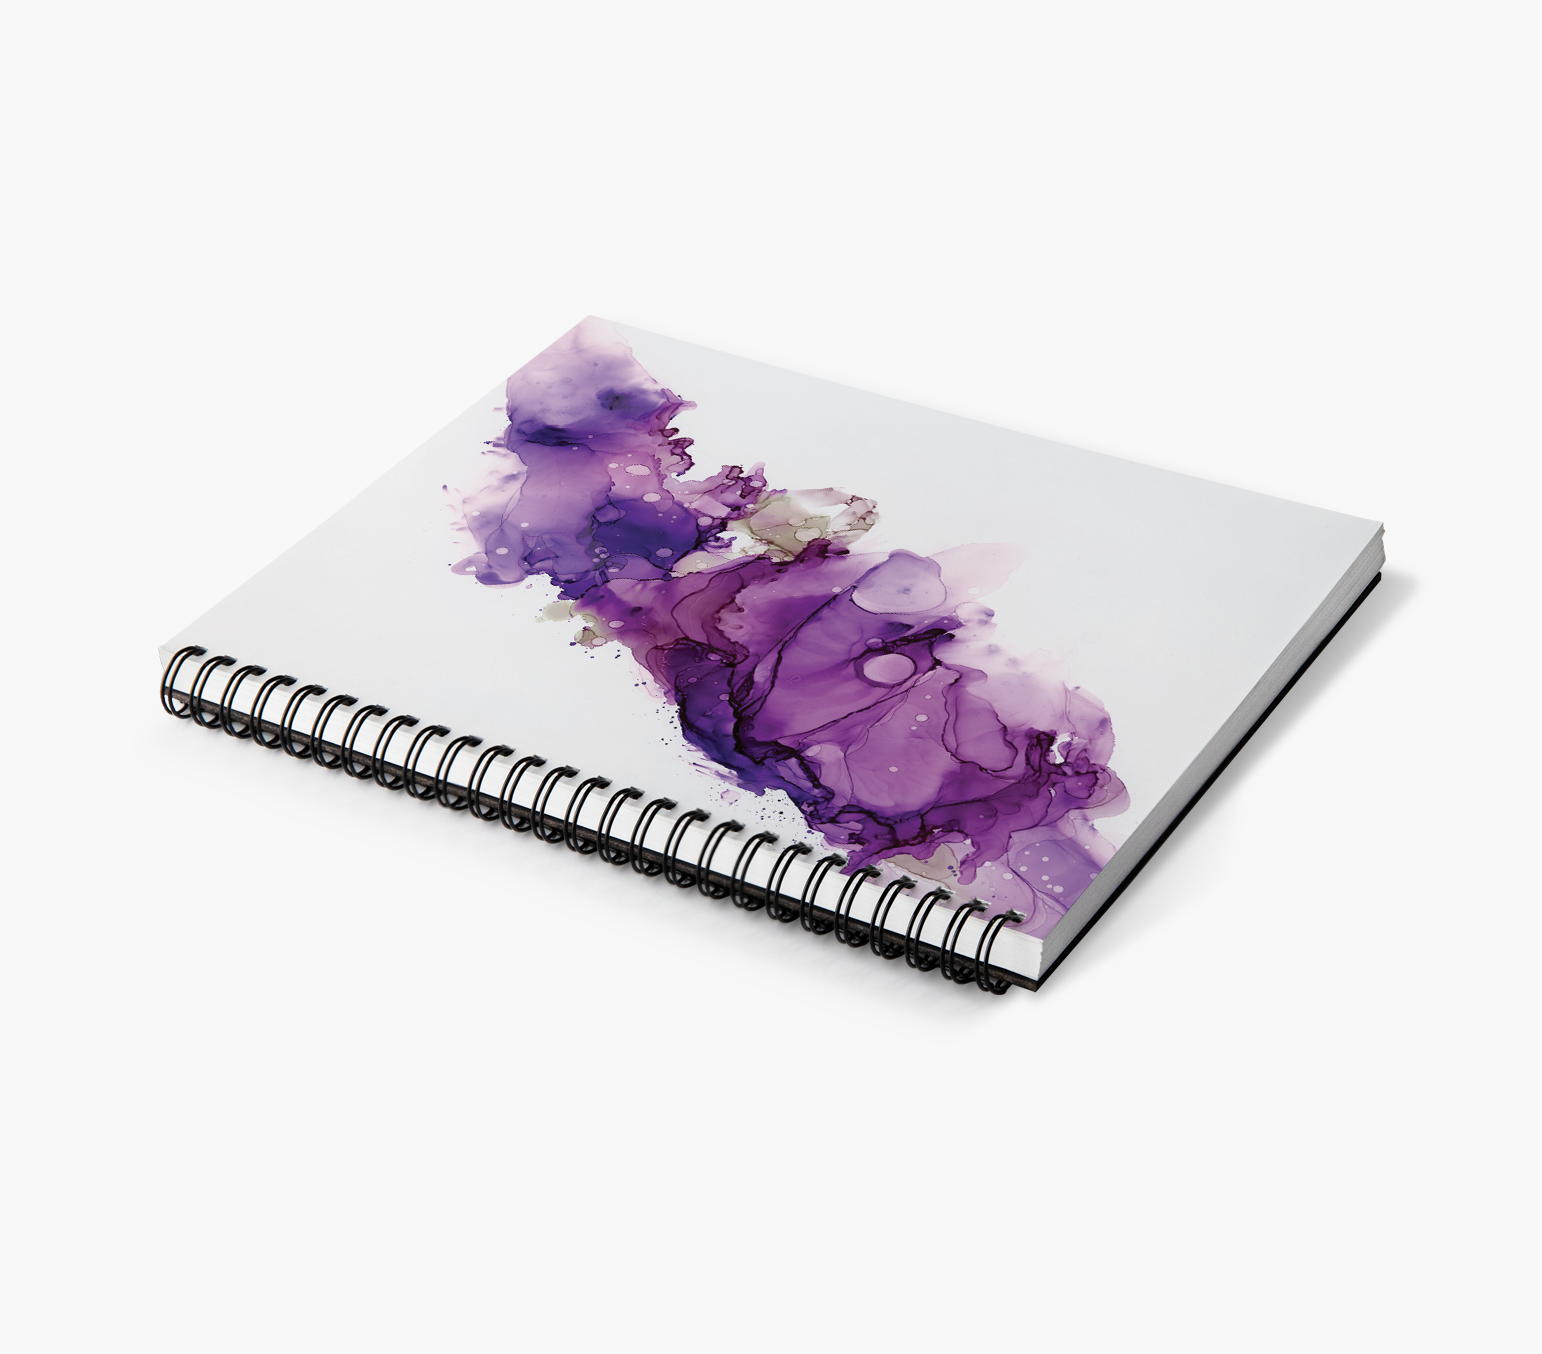 Watercolor floral bouquet, Notebook Lined Spiral